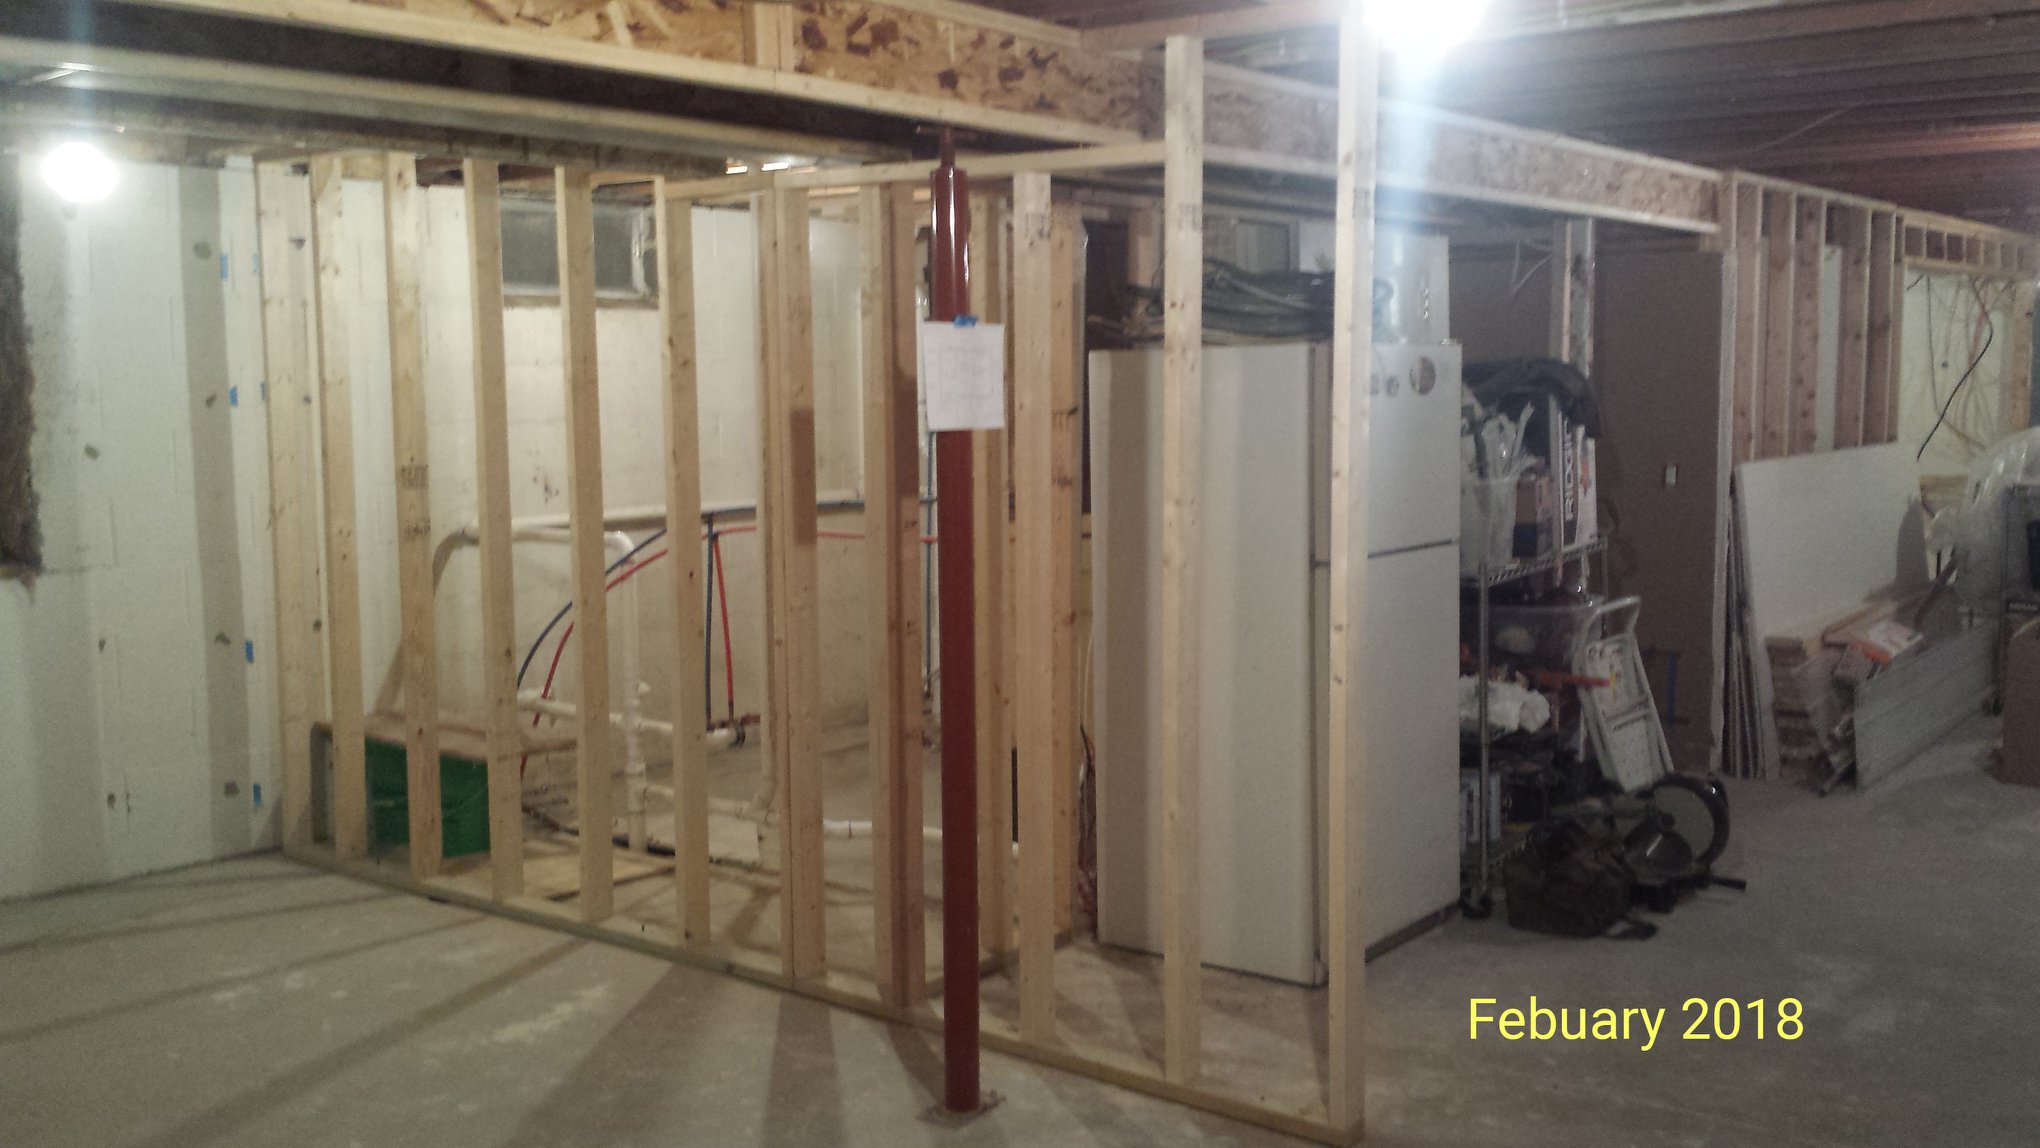 A stud wall is installed in an unfinished basement as seen in February 2018.